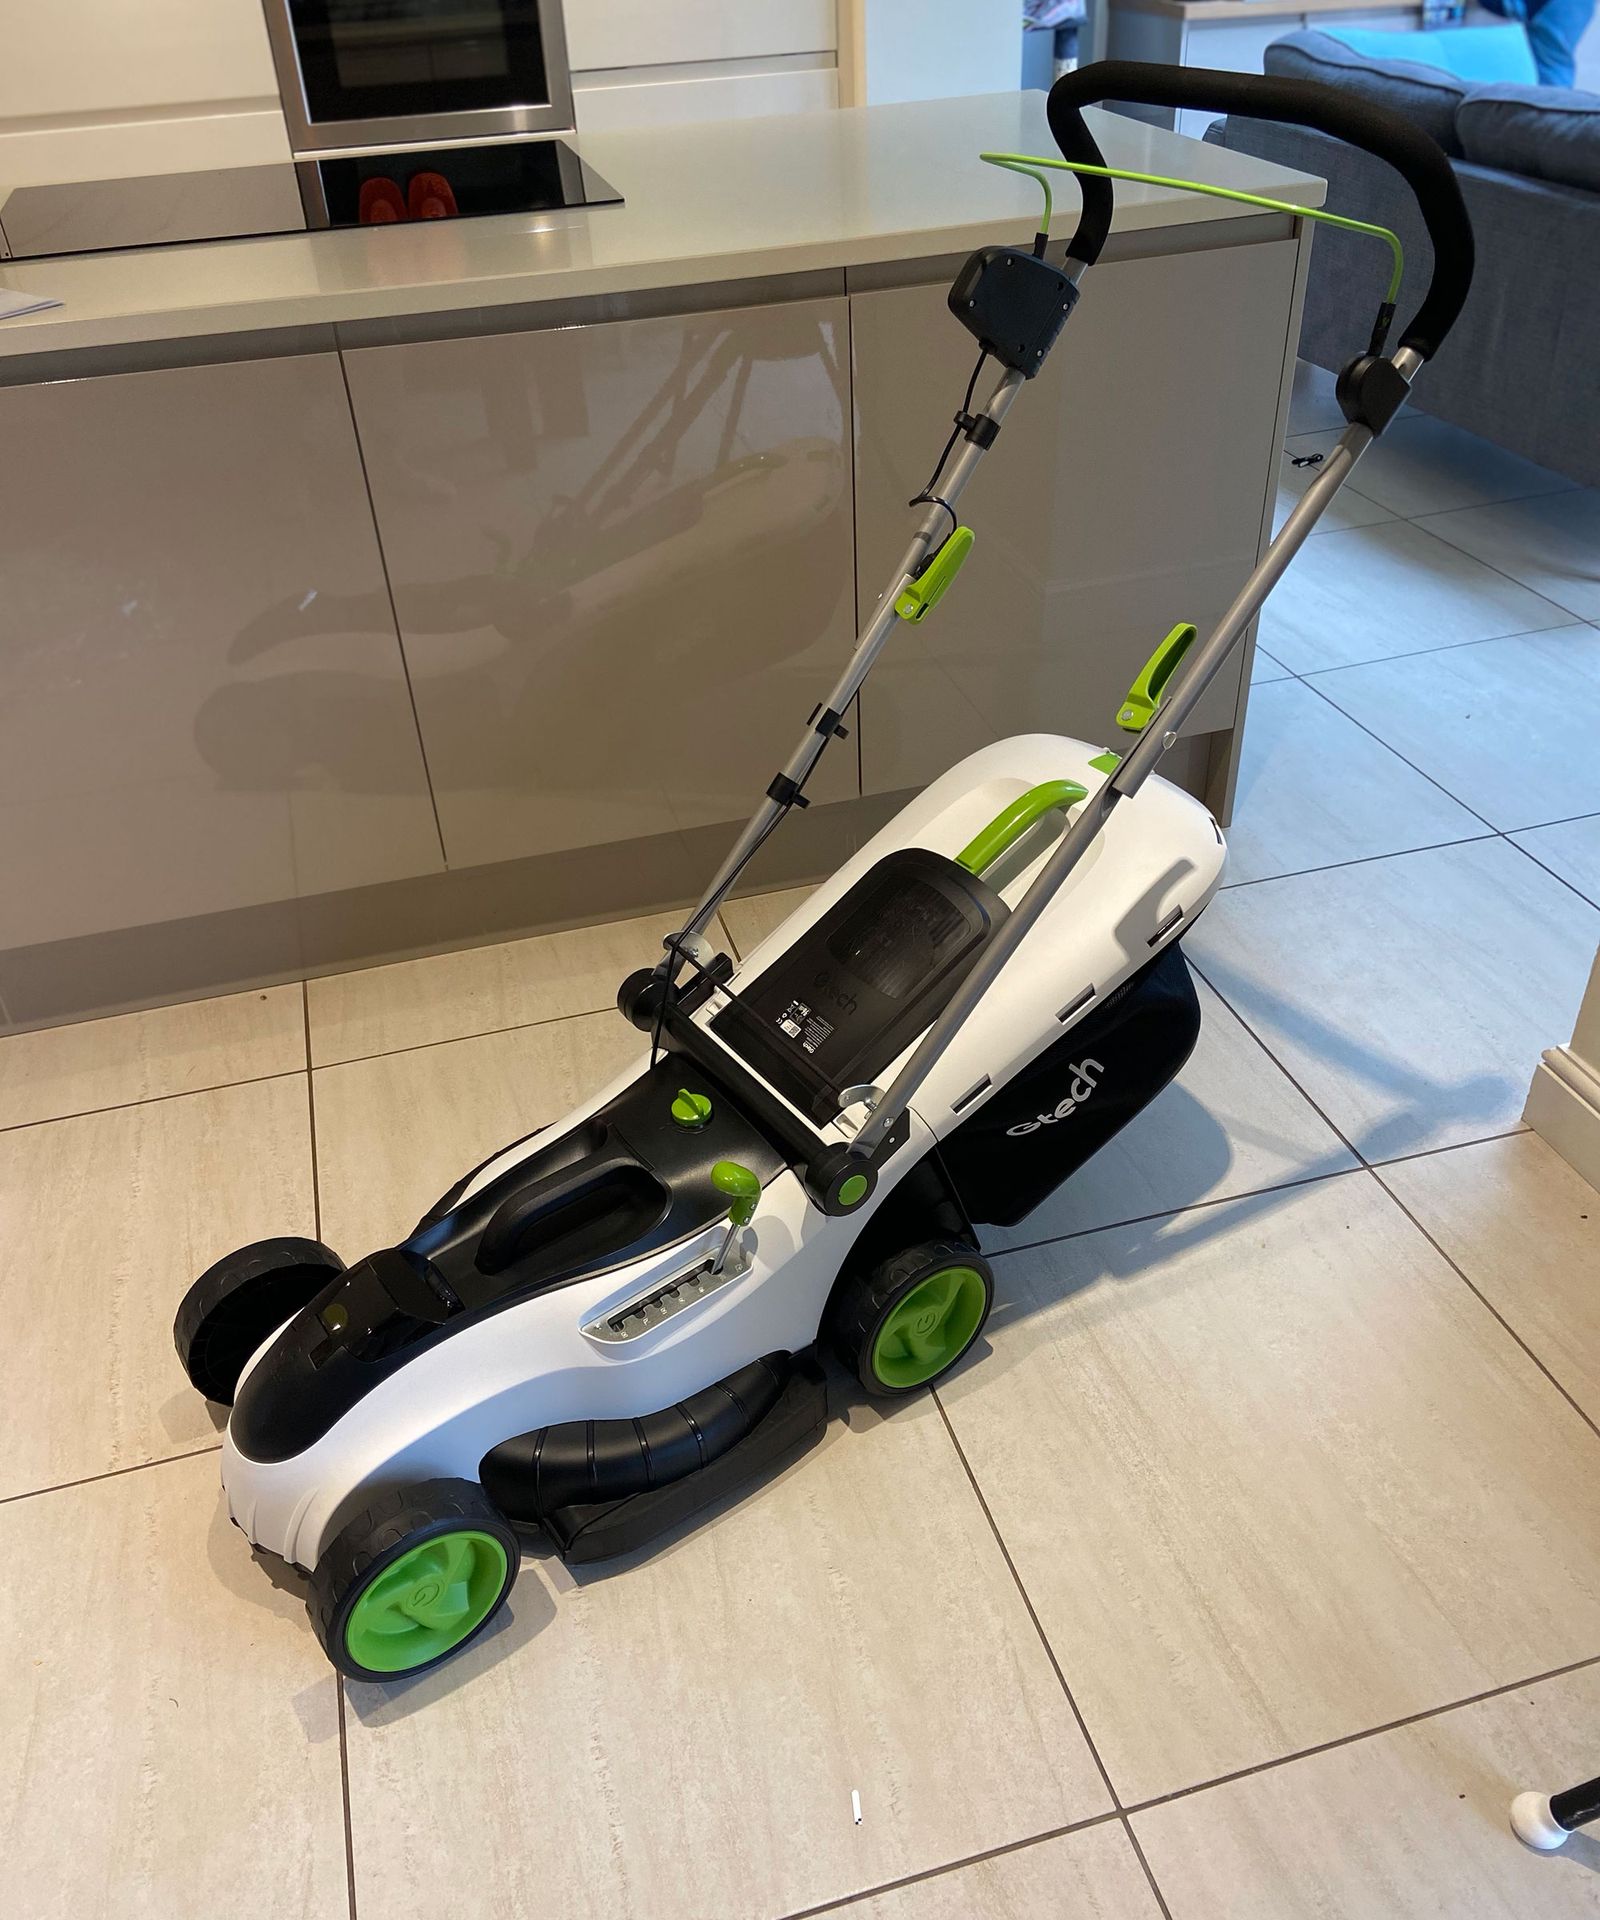 Gtech Clm50 Cordless Lawn Mower Review Lightweight And Easy To Use